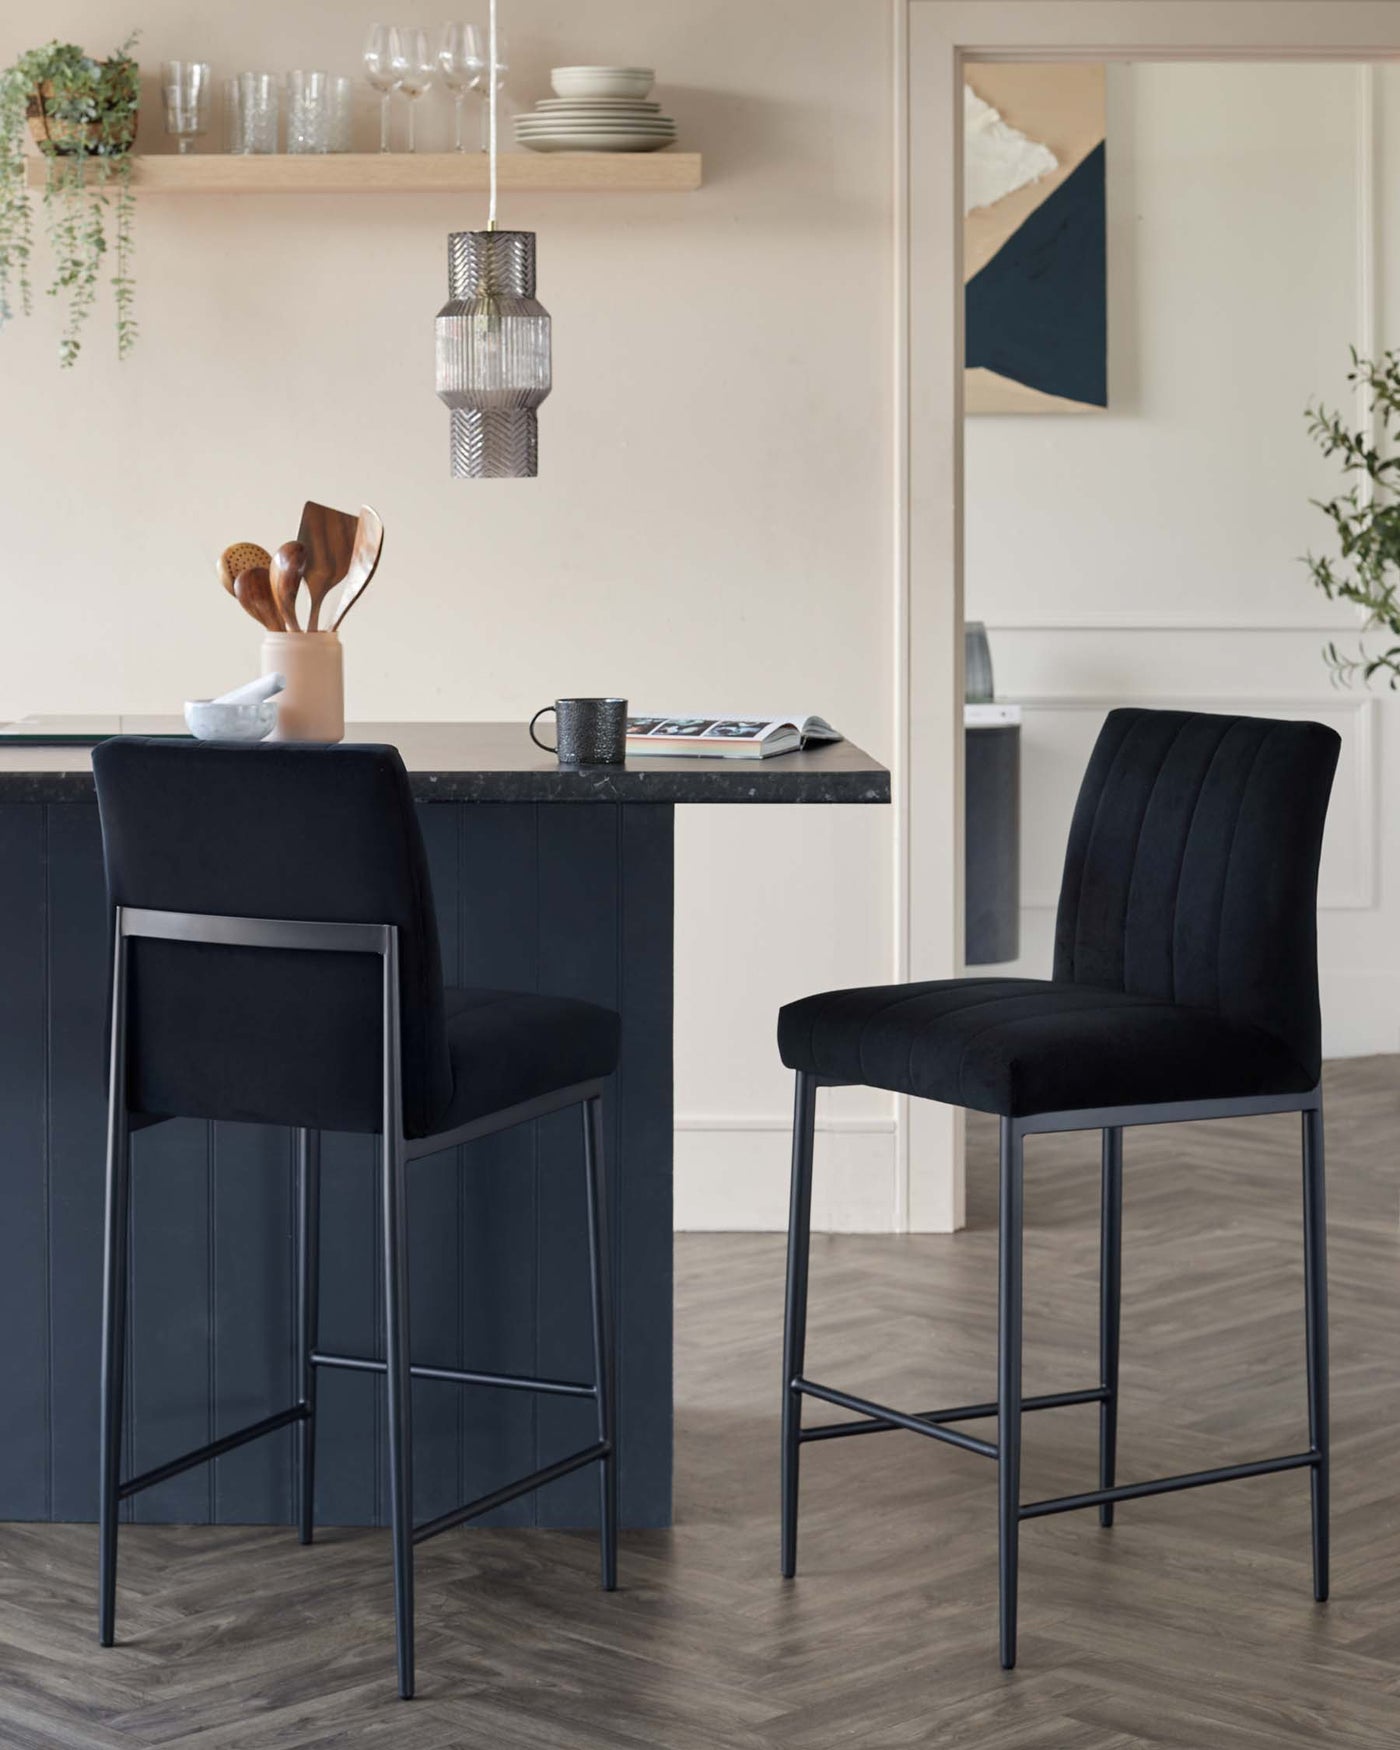 Two elegant bar stools with black upholstered seats and vertical channel stitching. The stools feature a high-back design and rest on slender metal legs with footrests. They are positioned against a dark modern kitchen island.